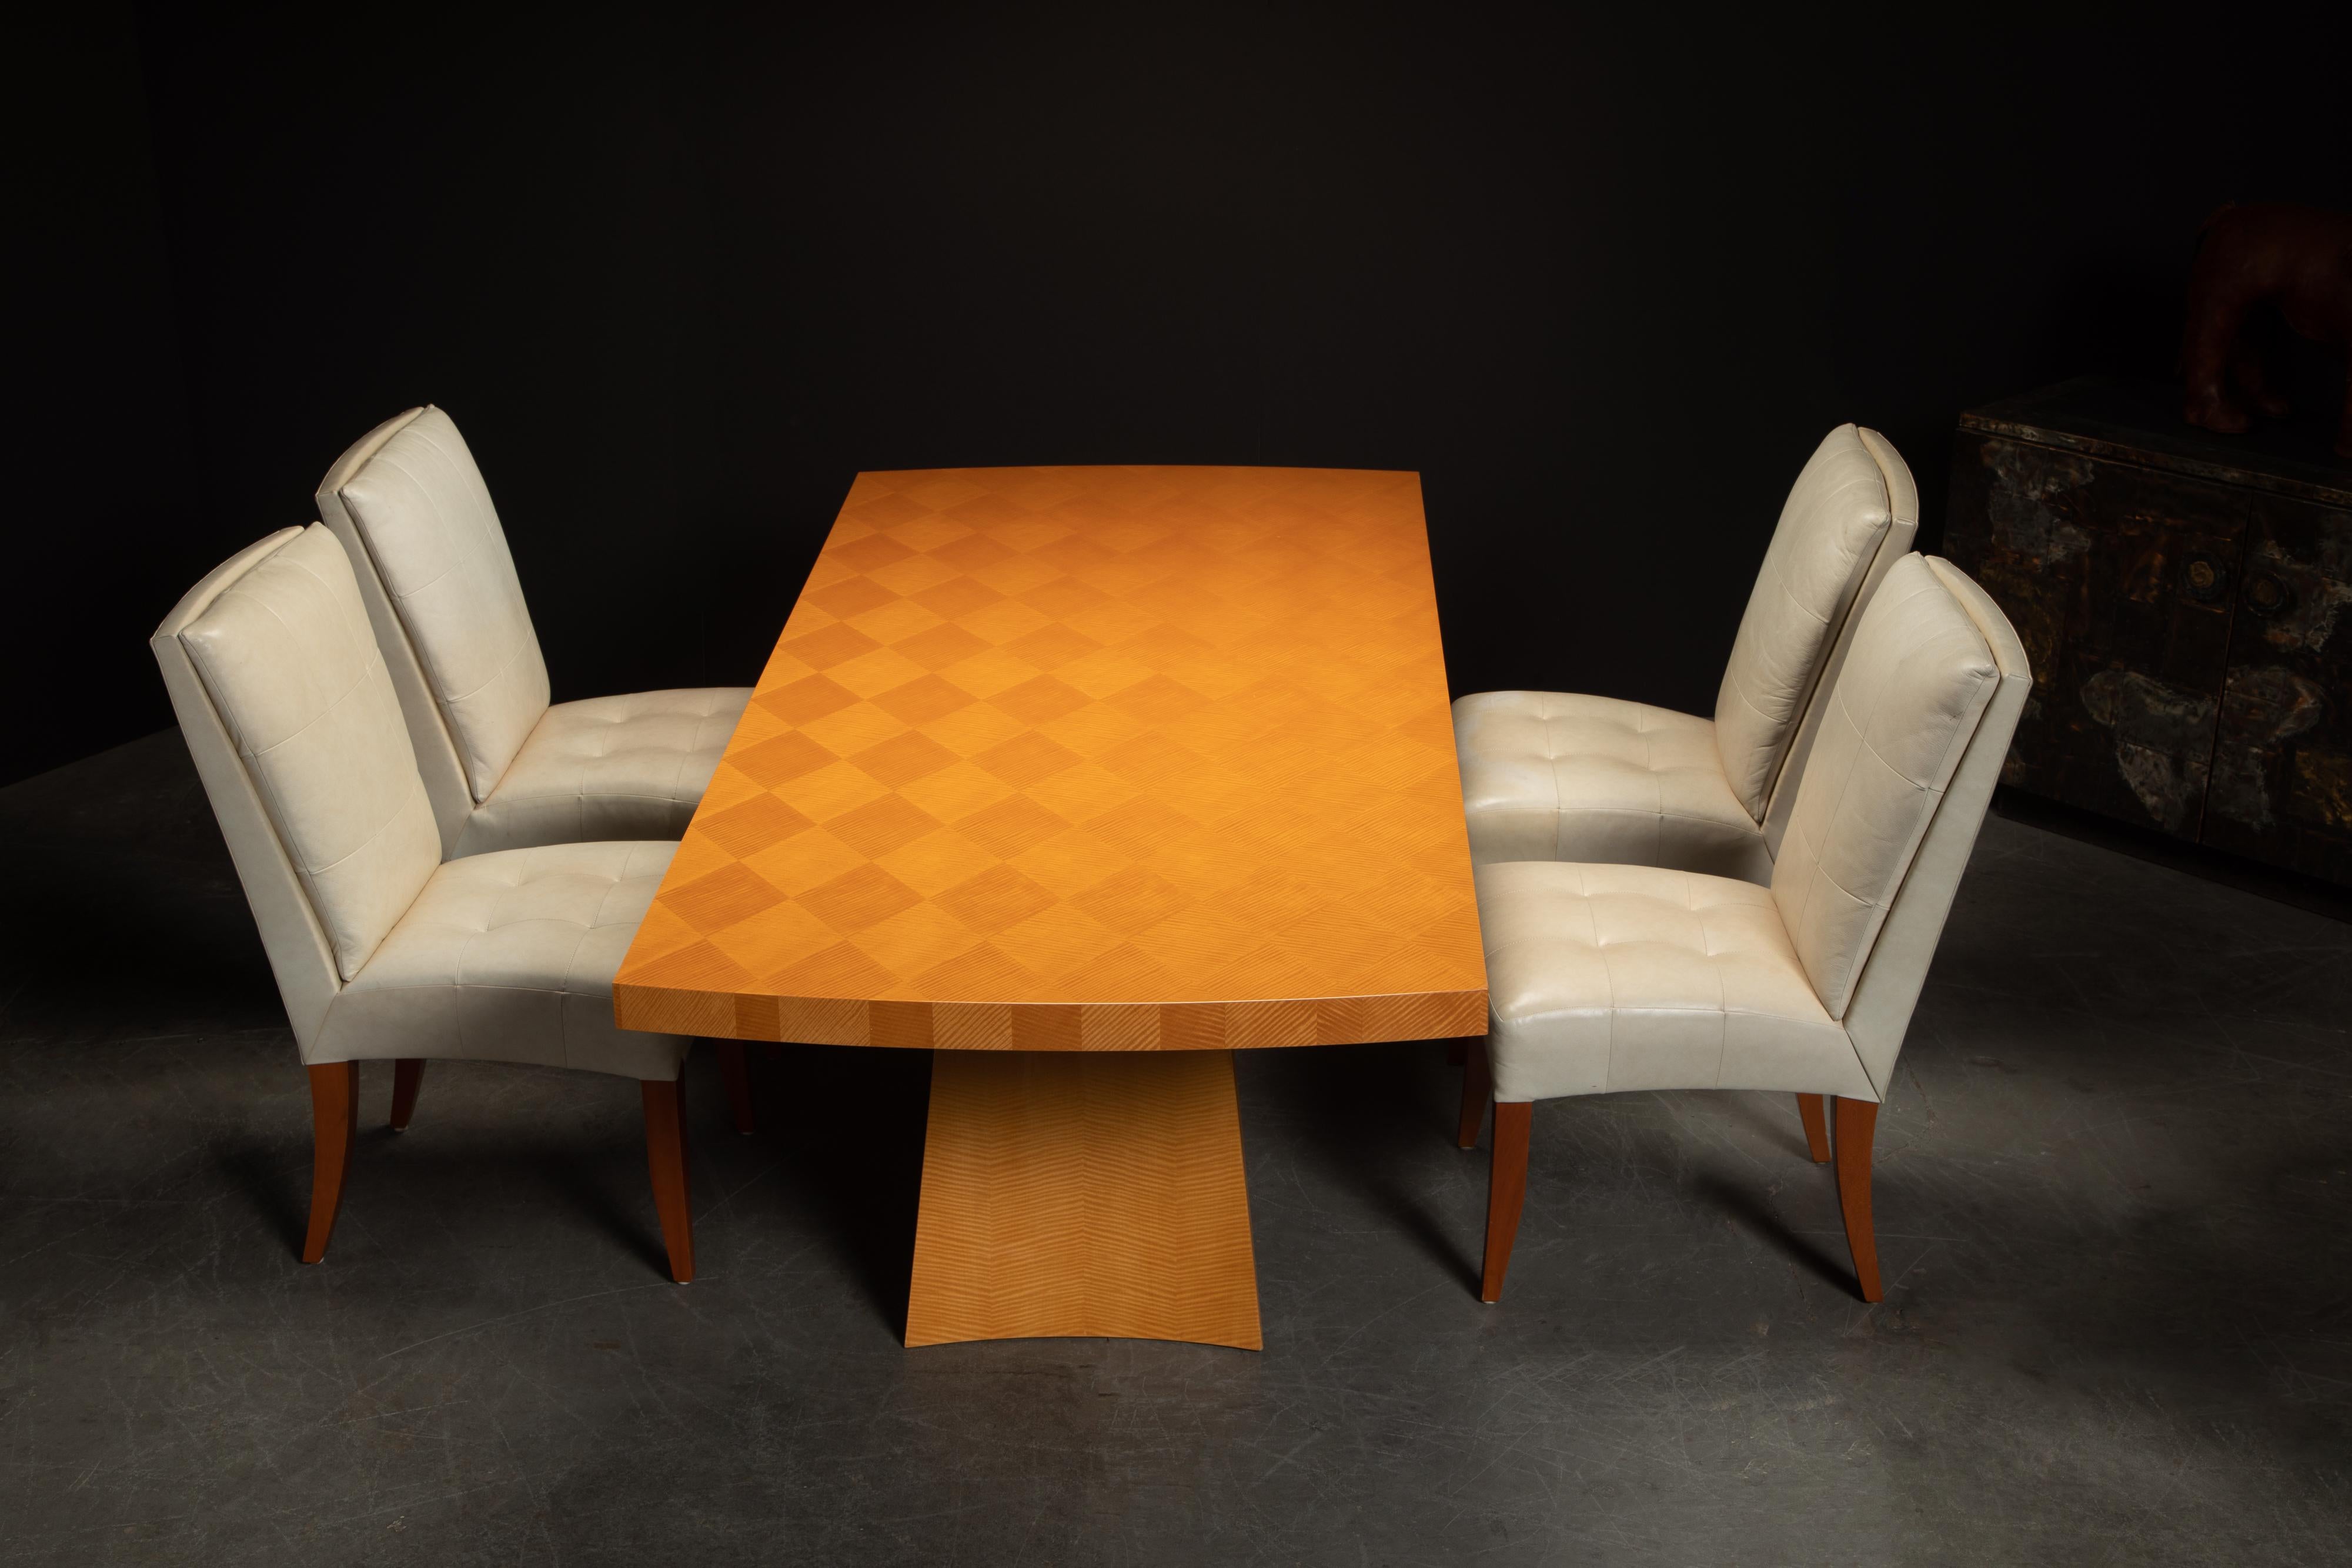 American Dakota Jackson 'Wonder' Exotic Wood Dining Table with Six 'Puff' Chairs, Signed For Sale